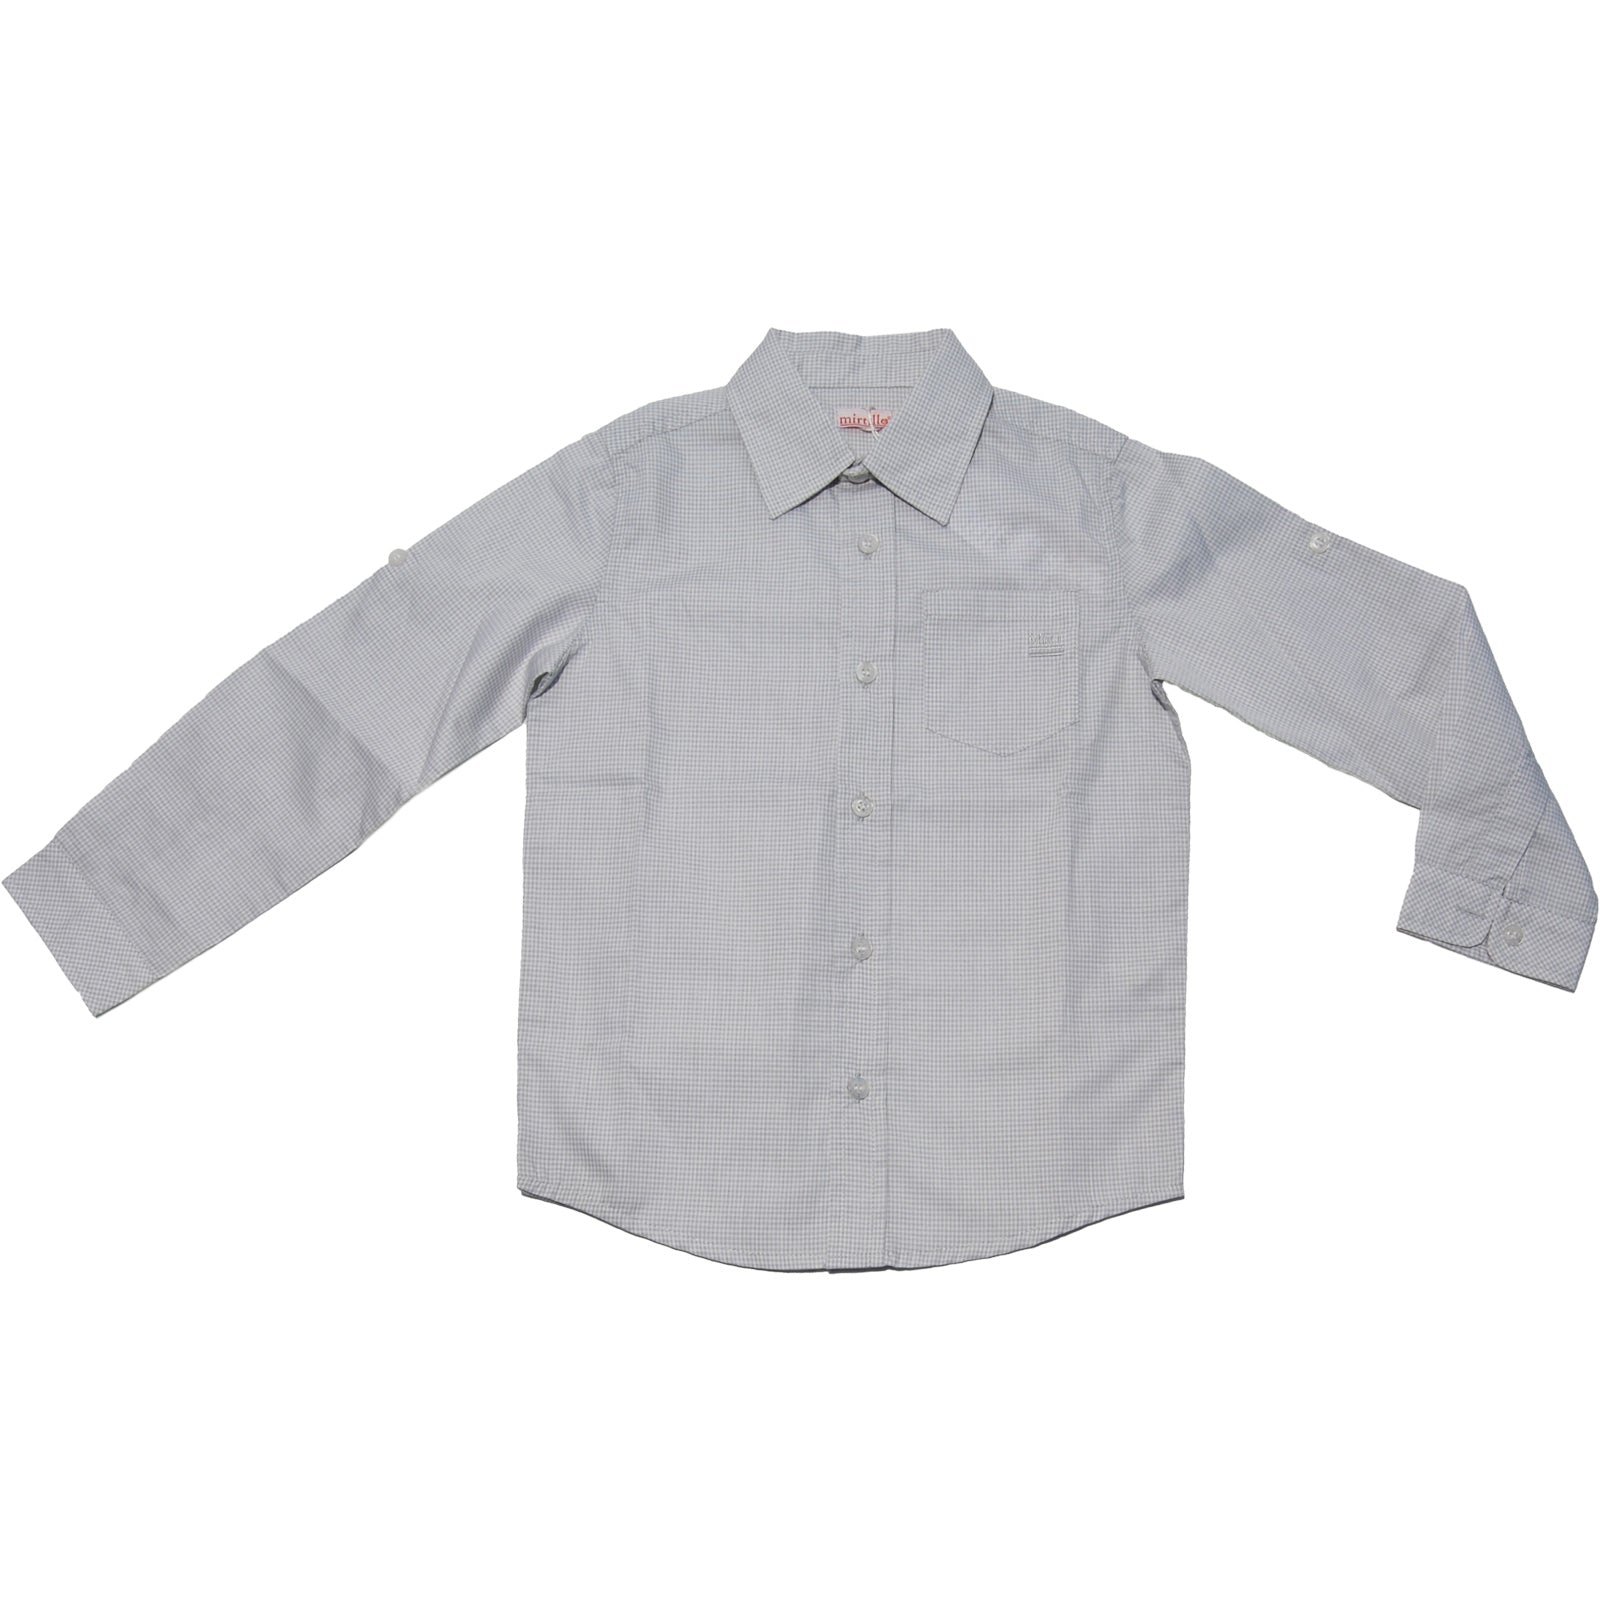 
  Long-sleeved shirt from the Blueberry children's clothing line, grey on white micro-square pat...